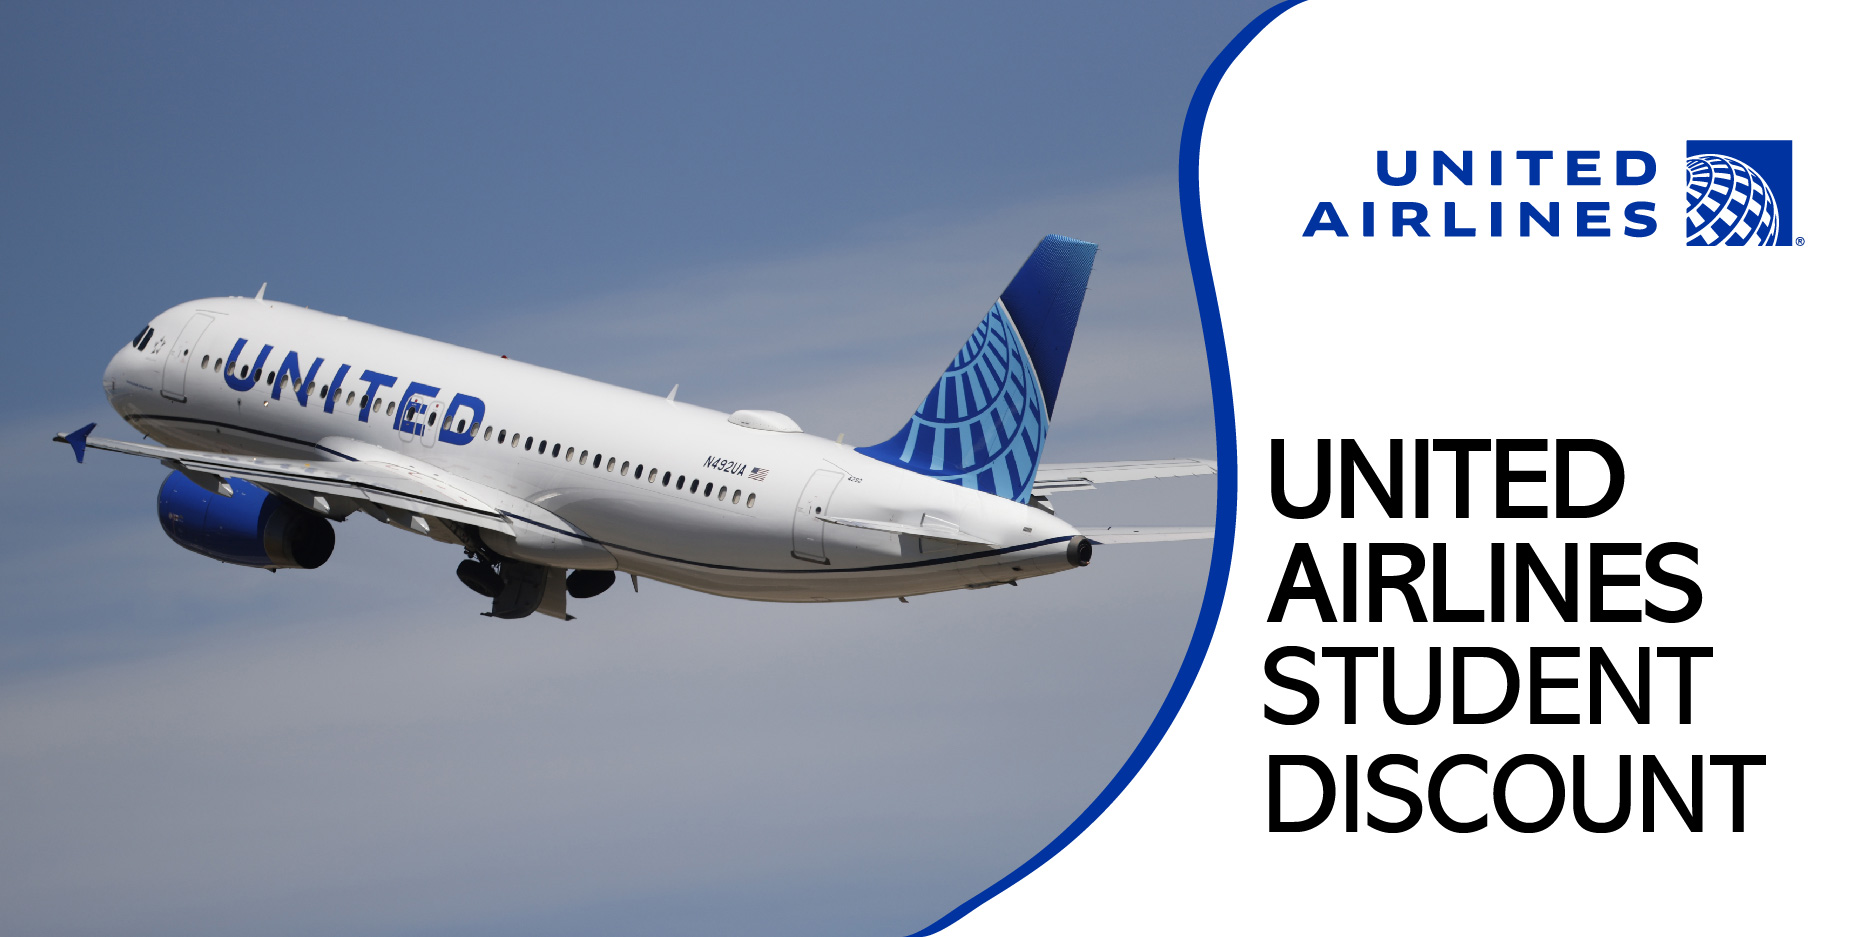 United Airlines Student Discount